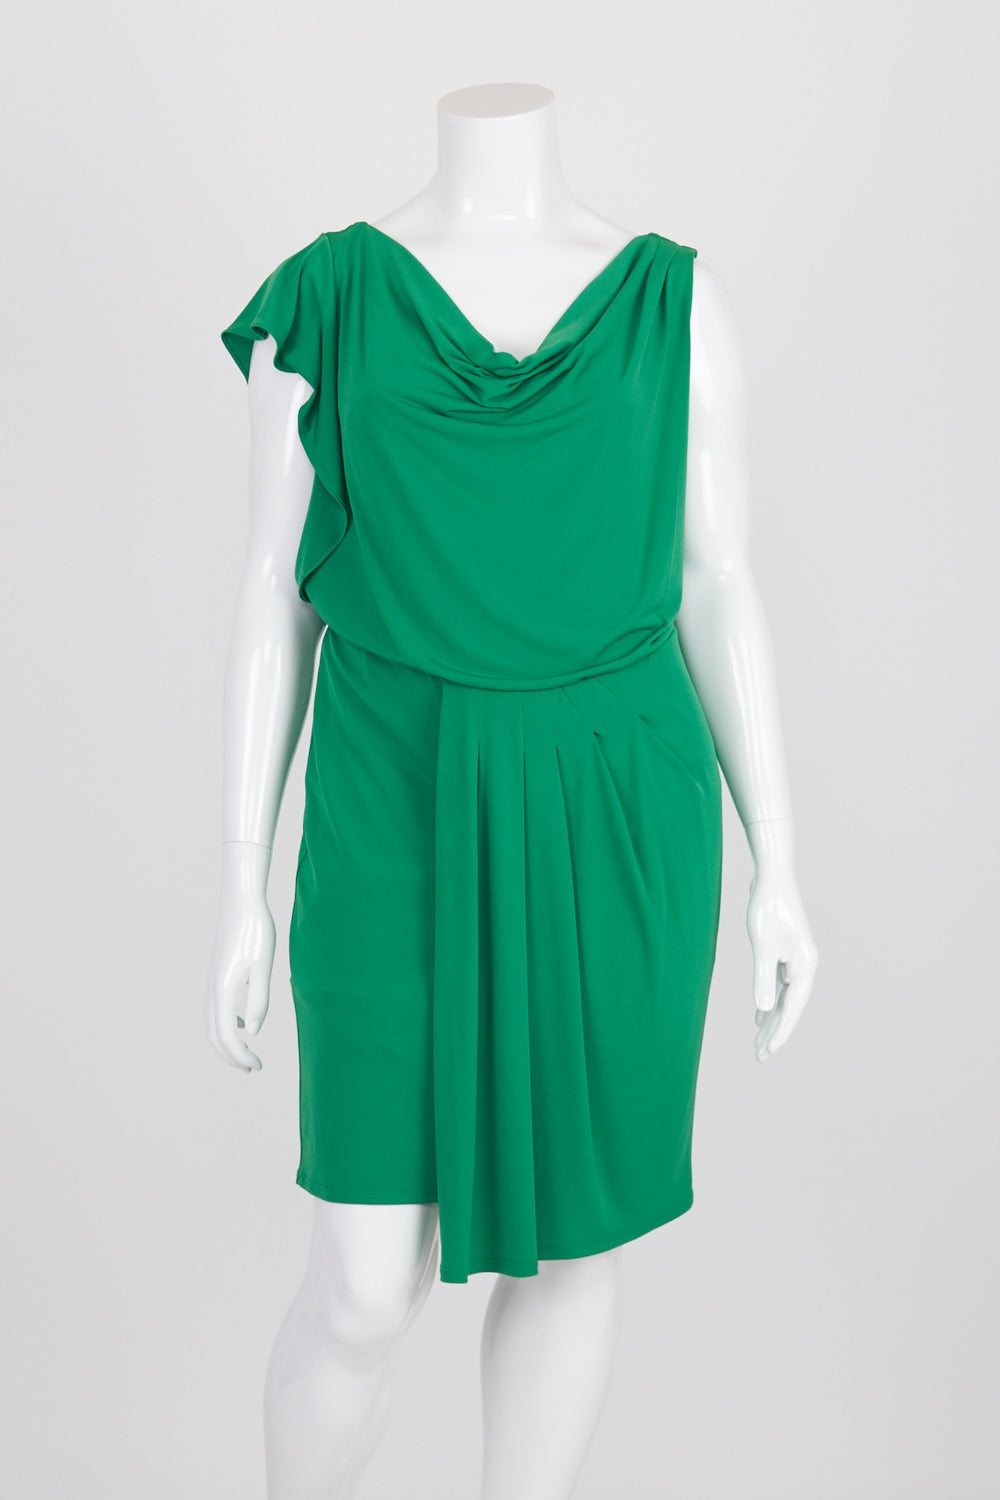 Vince Camuto Green Pleated Front Dress 12